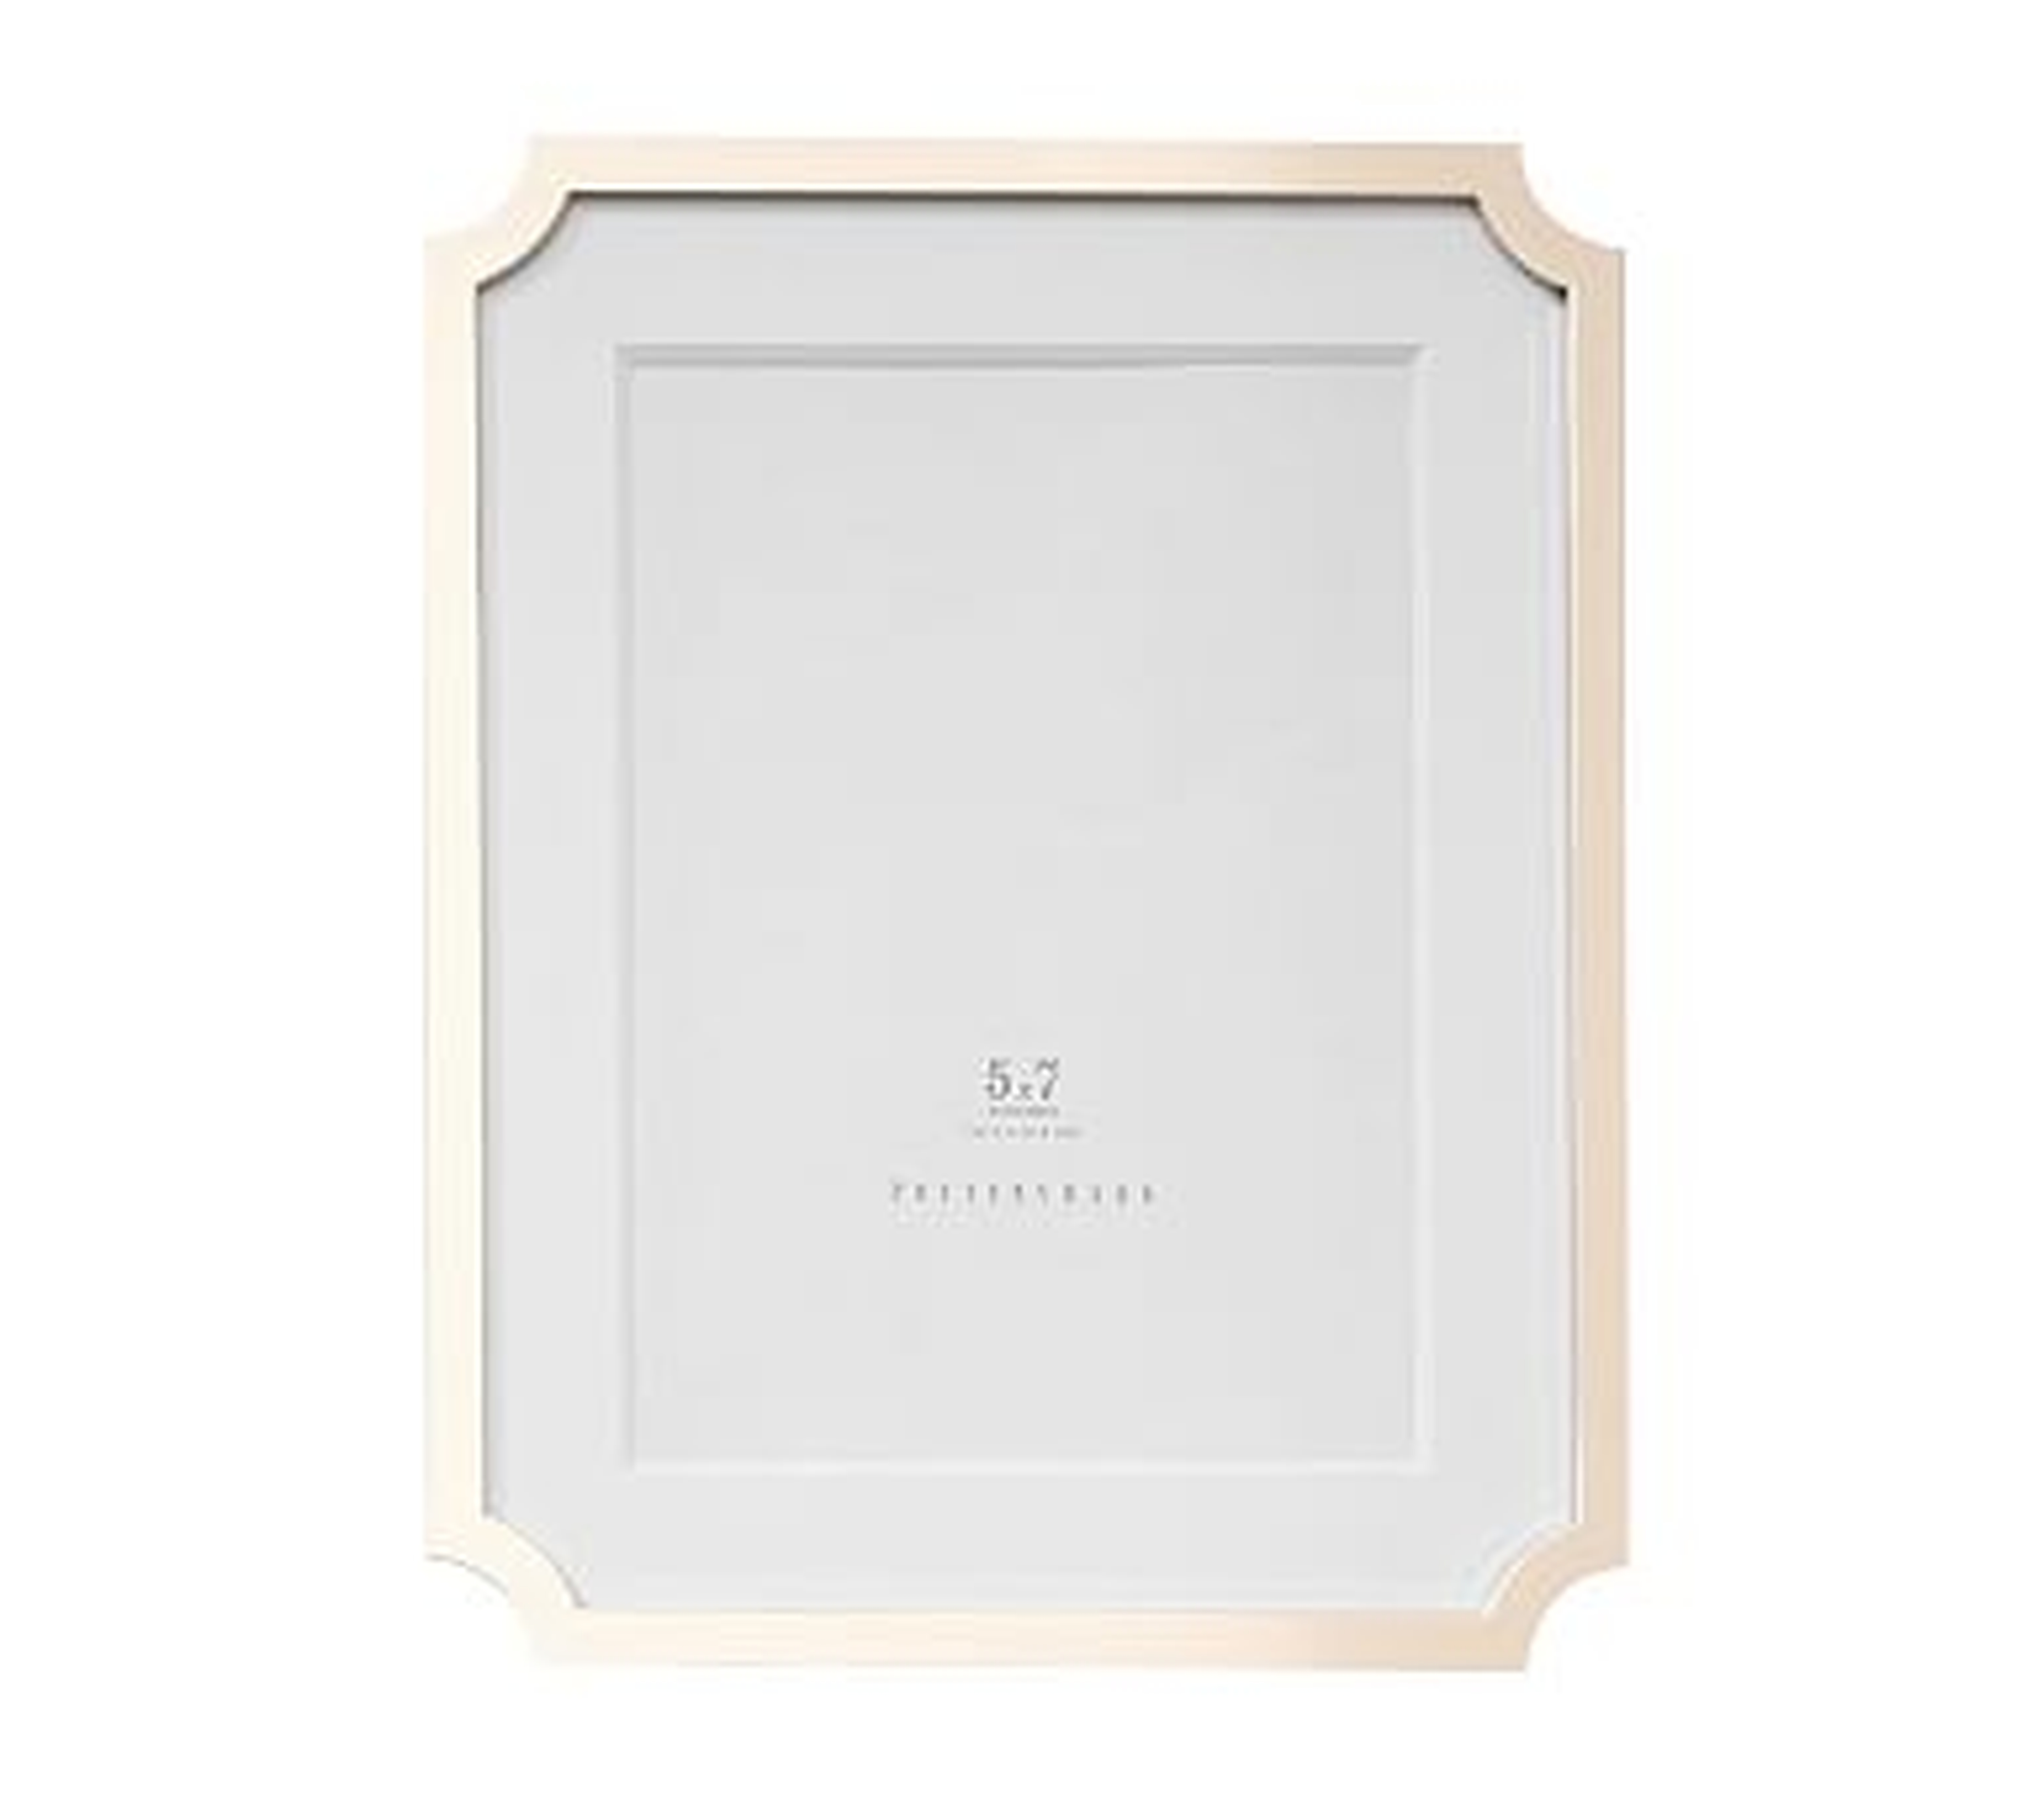 Monique Lhuillier Marlowe Frame, 5x7 - Rose Gold - Pottery Barn